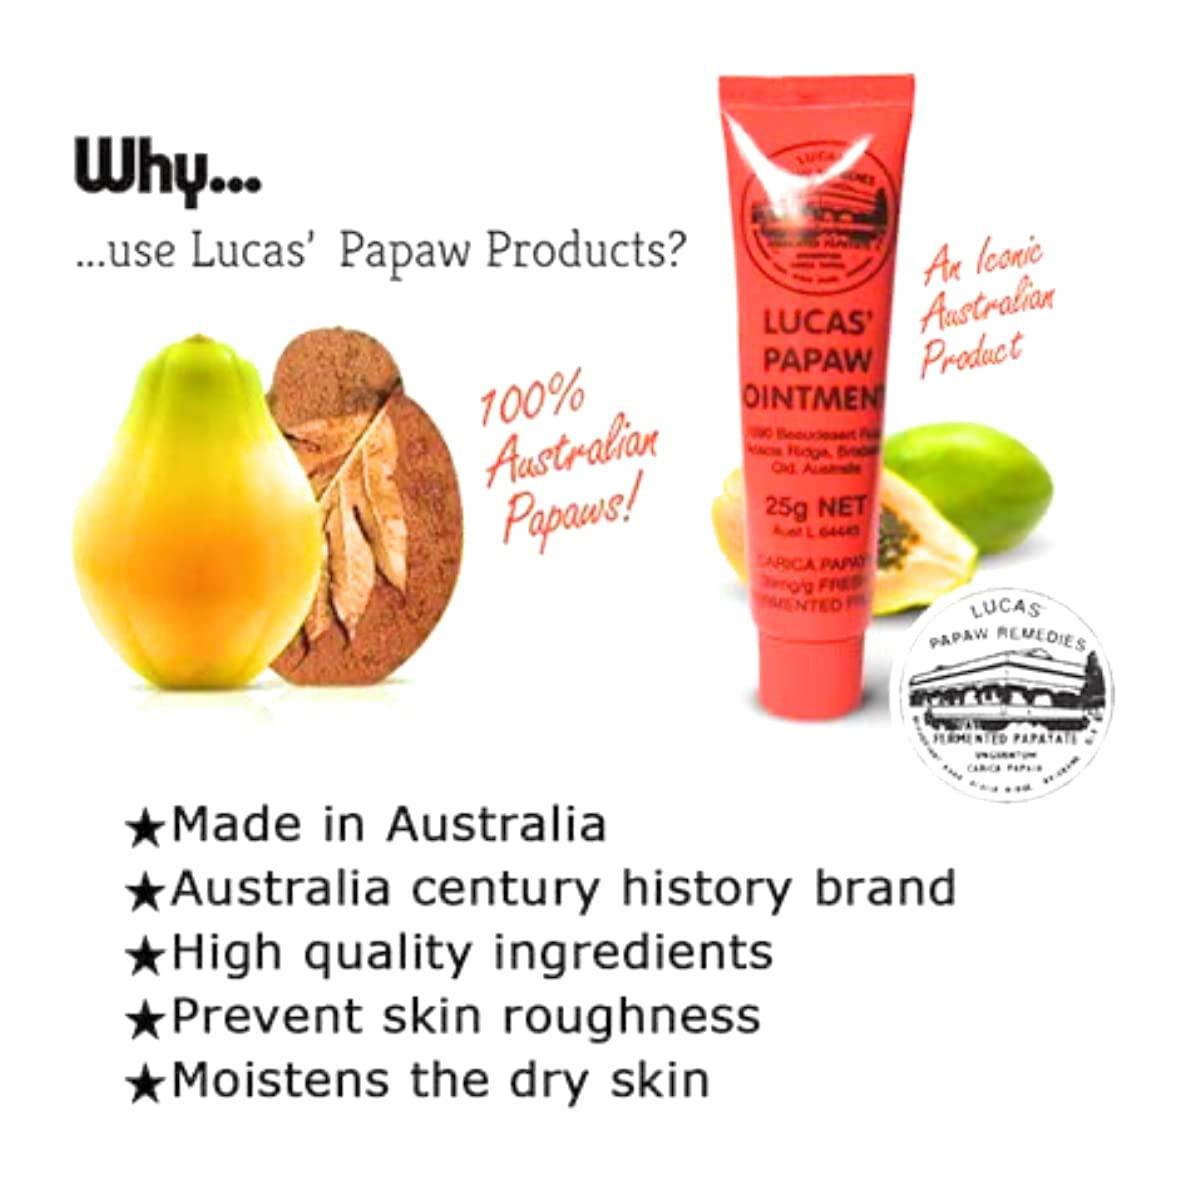 Lucas Papaw Ointment - Now Available - SkinshareSG